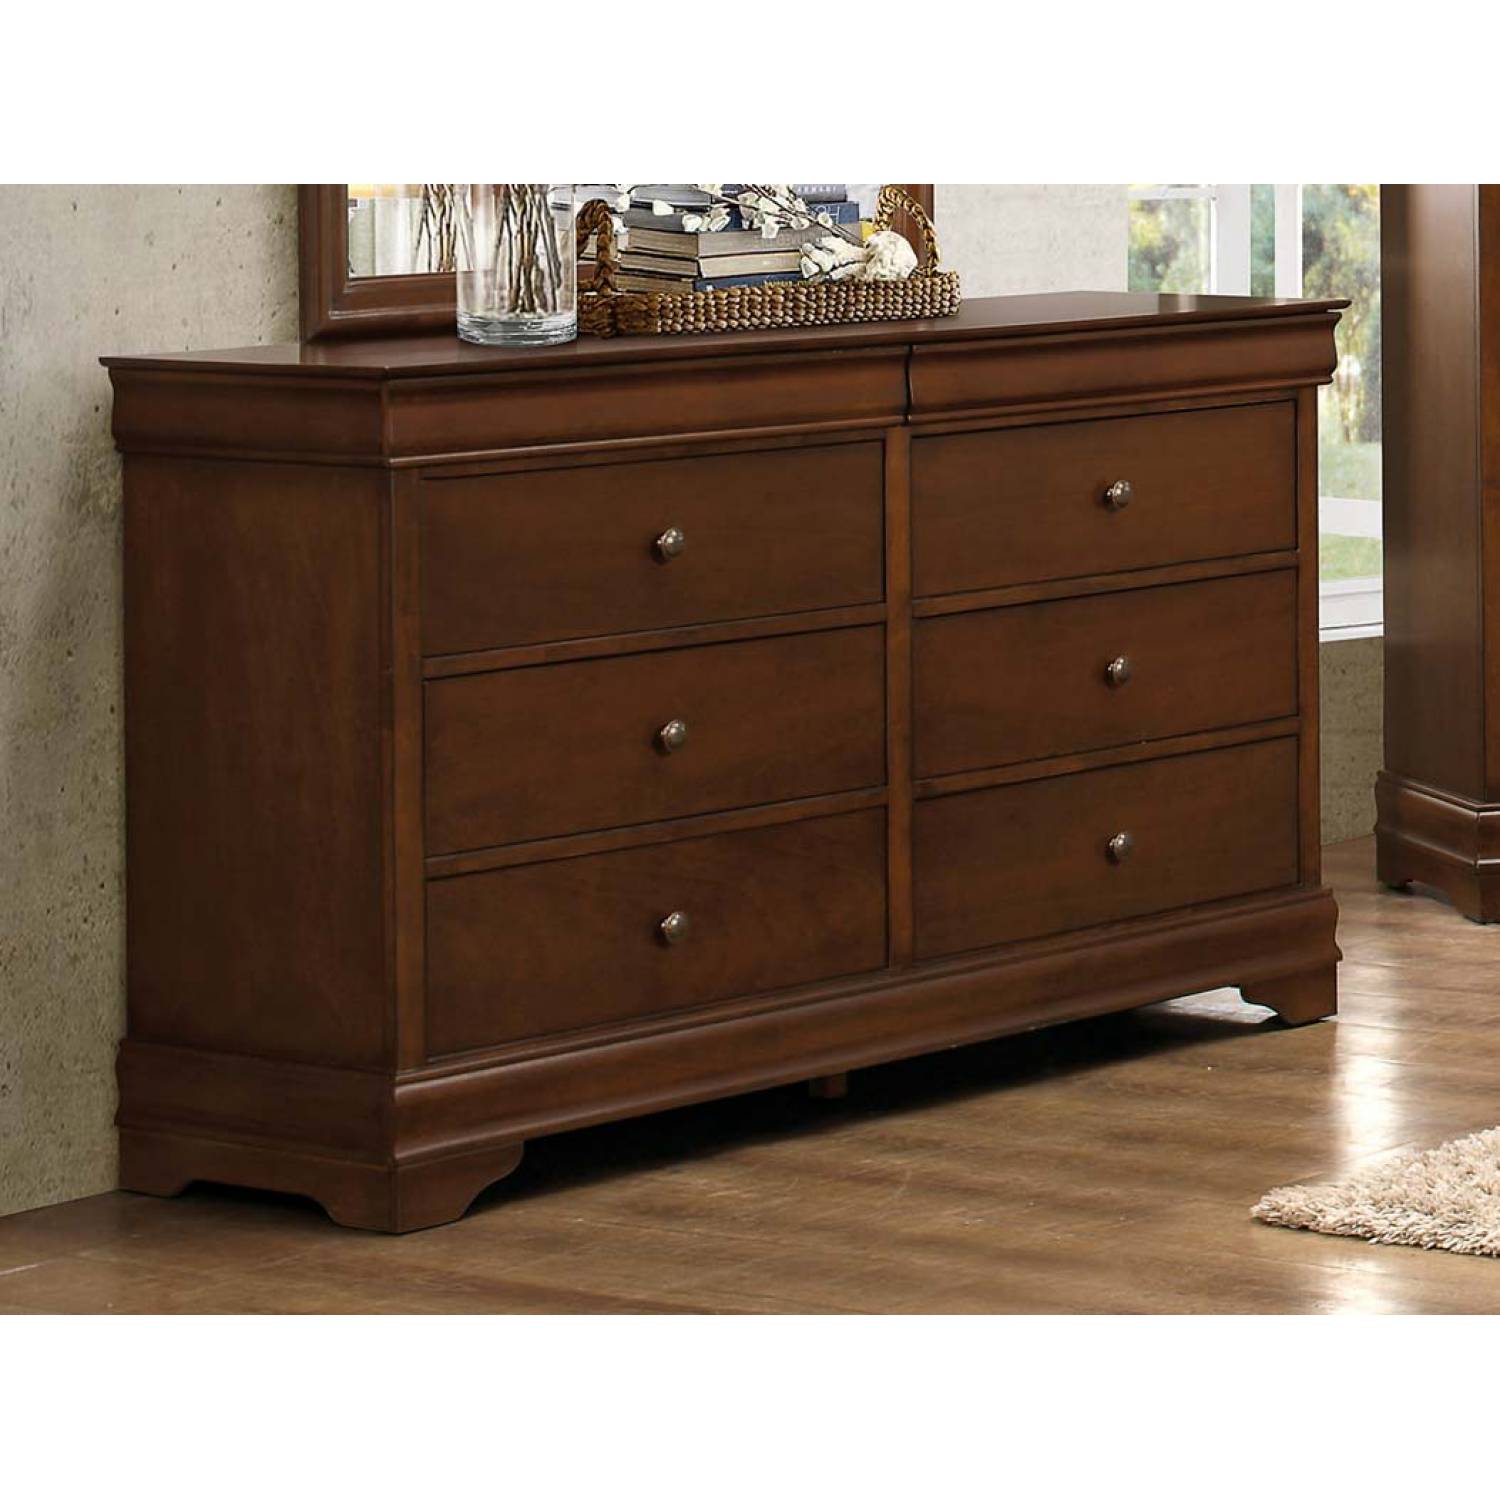 Abbeville Sleigh Dresser With Two Hidden Drawers Brown Cherry